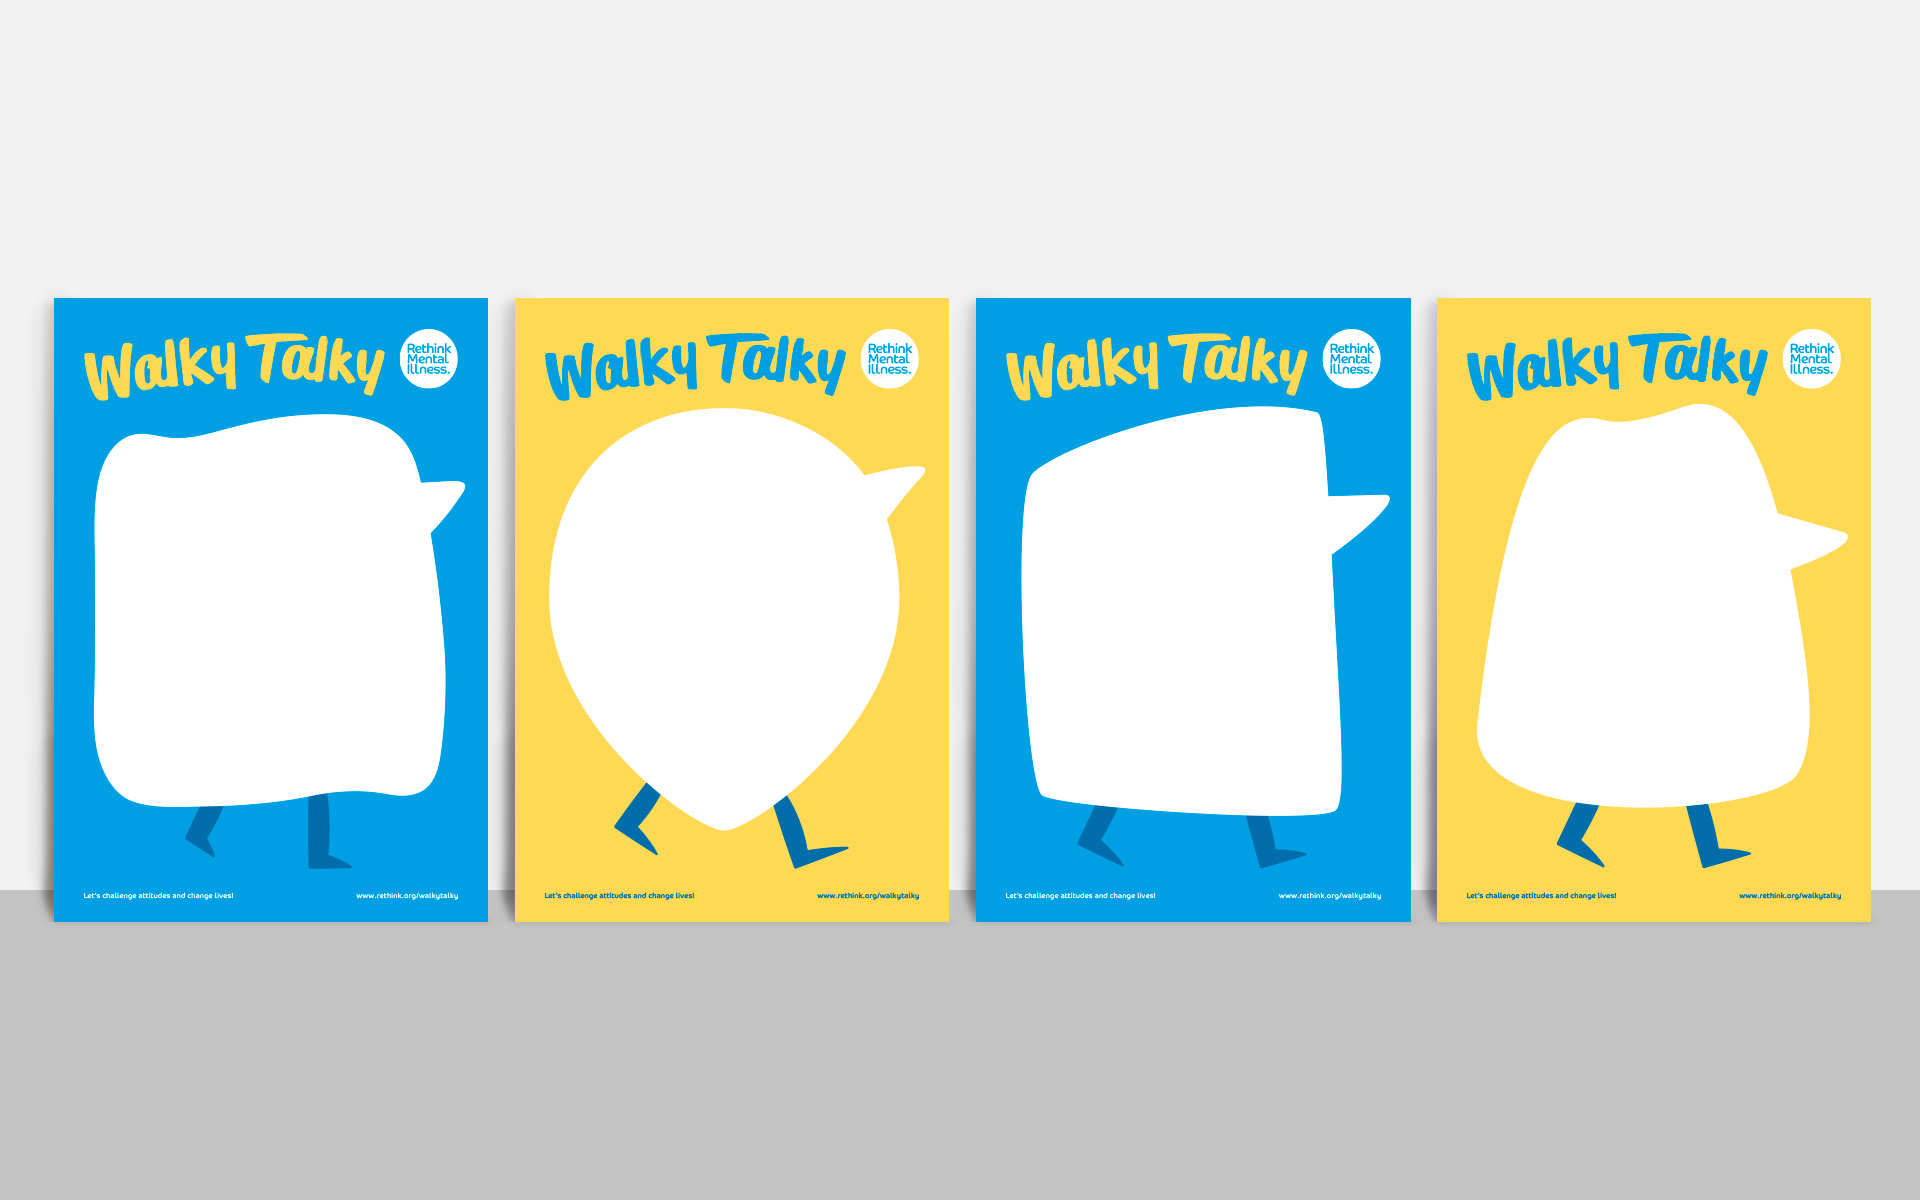 Walky Talky empty belly poster designs